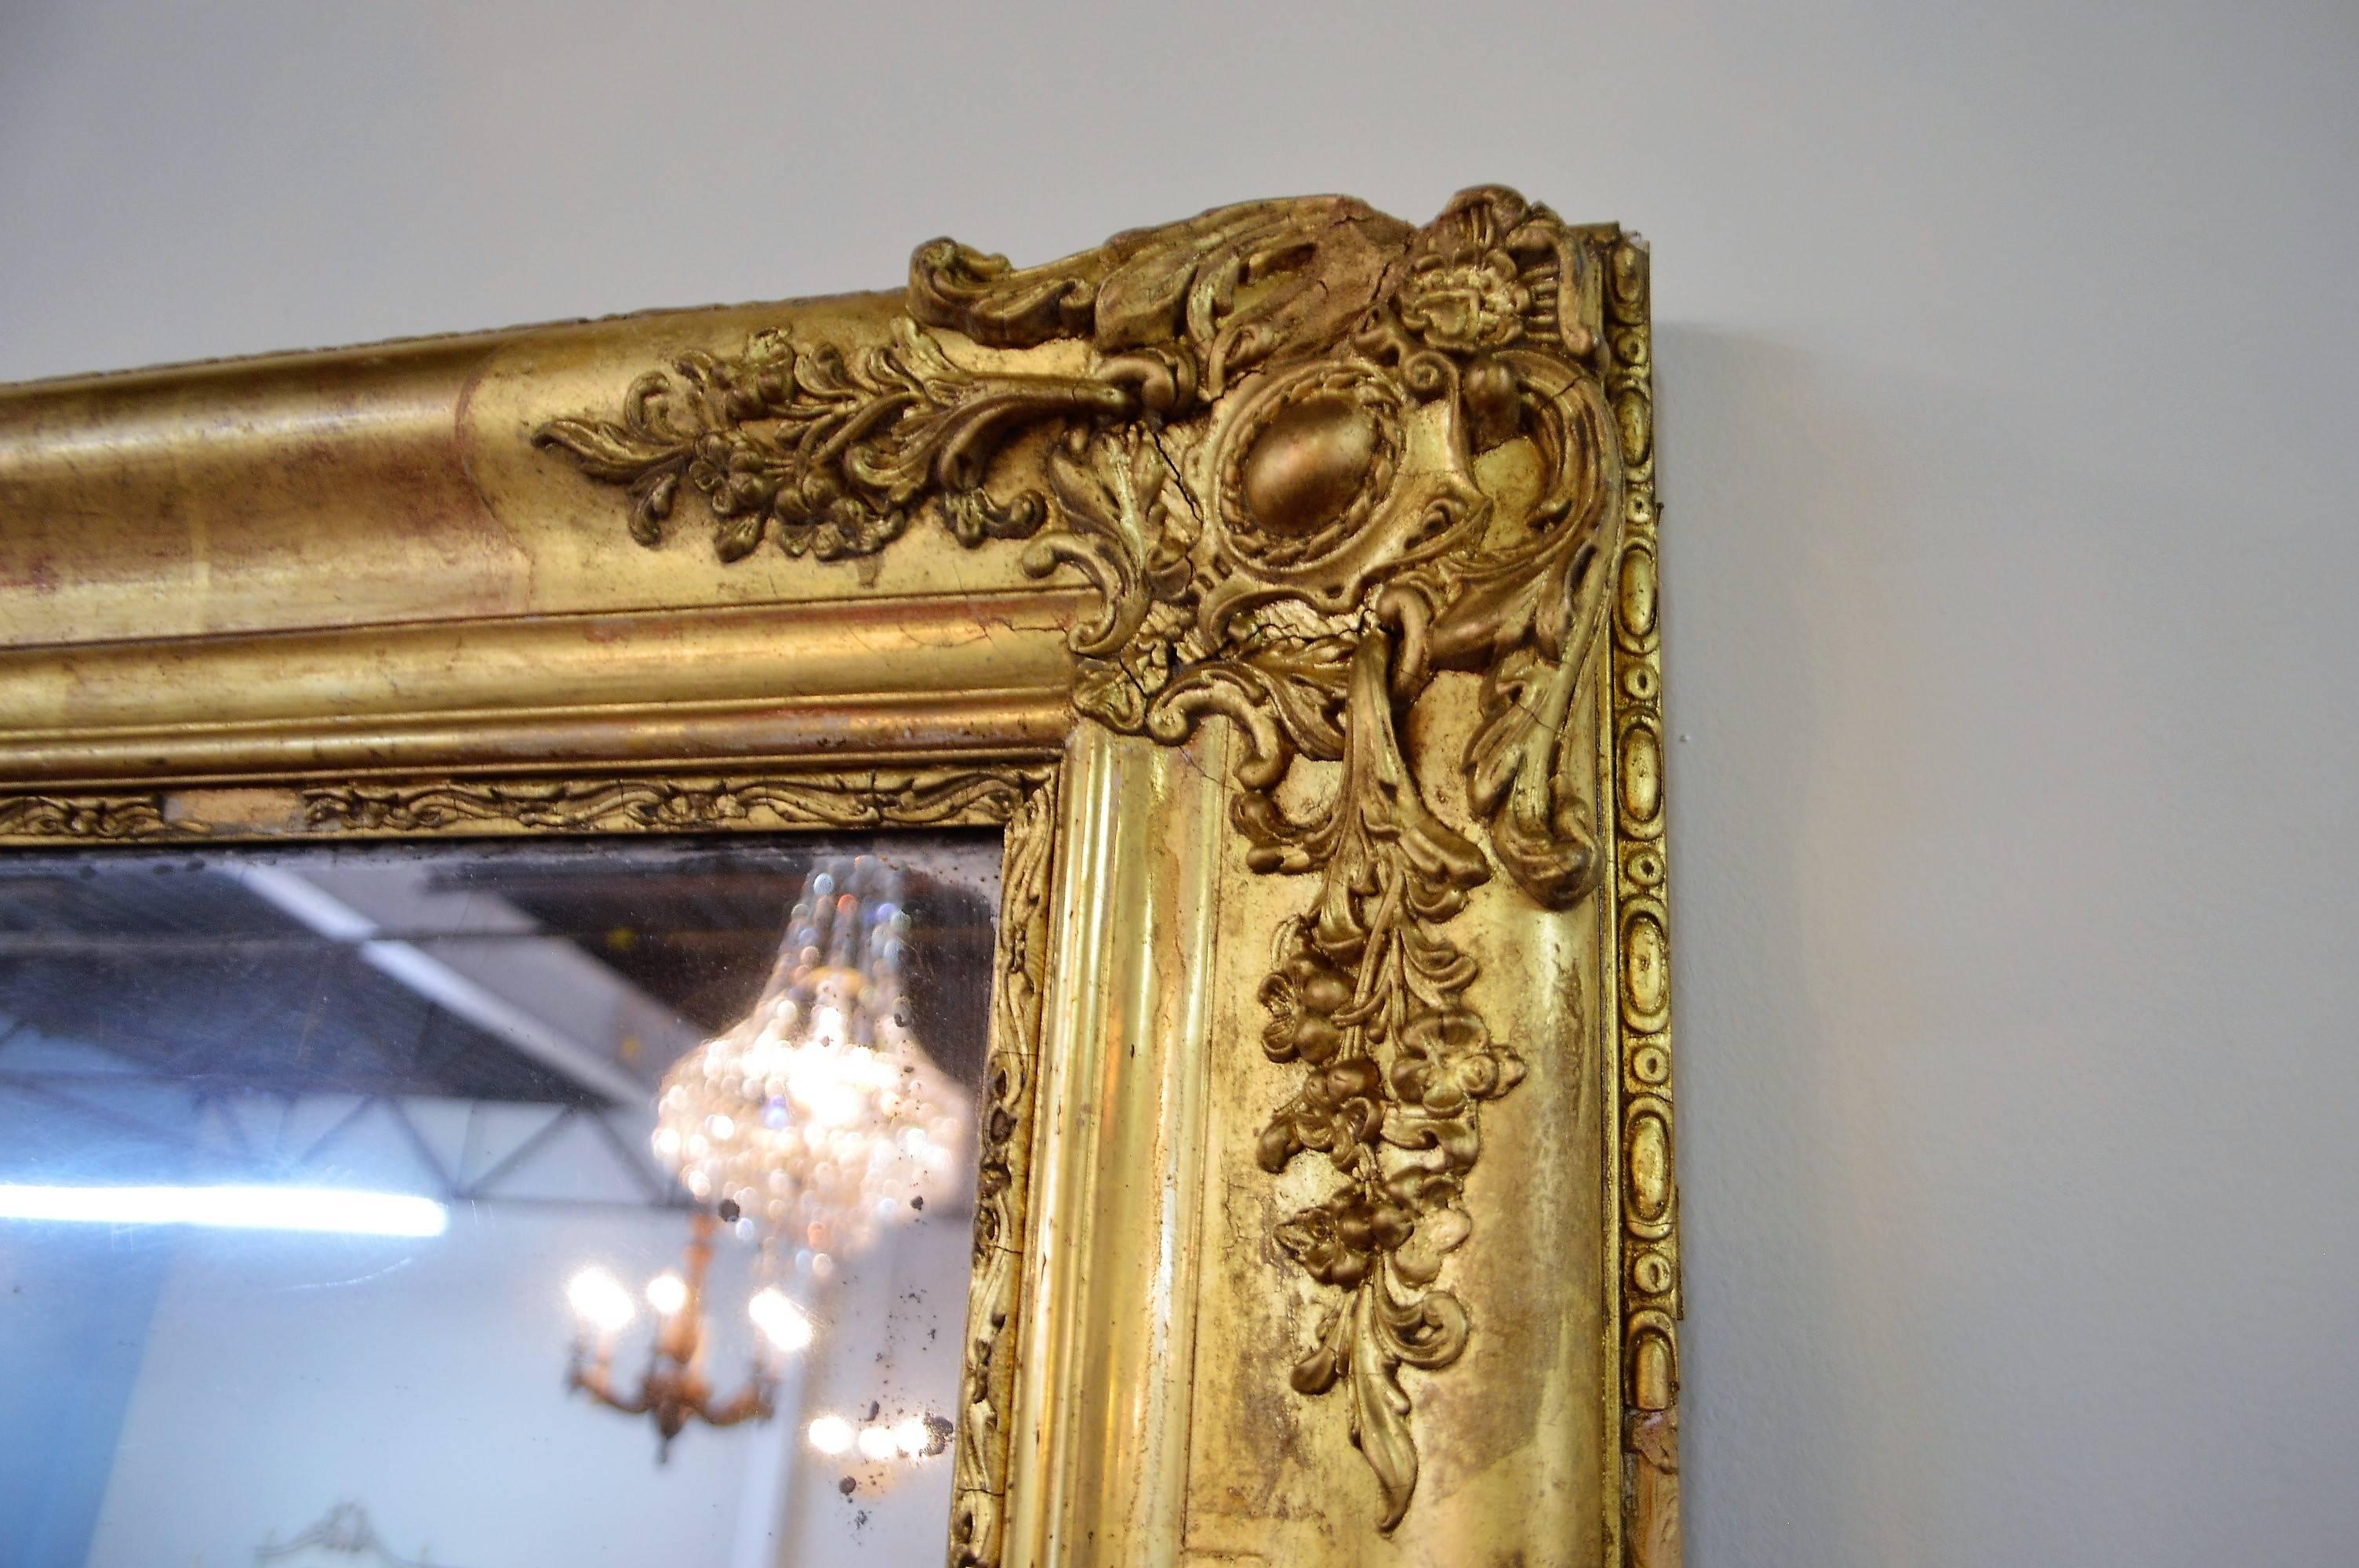 Mid-19th century Louis XV style large decorative mirror with carved details of medallions, flowers and acanthus leaves on all four corners and side of frame.
The original mirror was quite distressed, we have replaced it with a new beveled mirror.